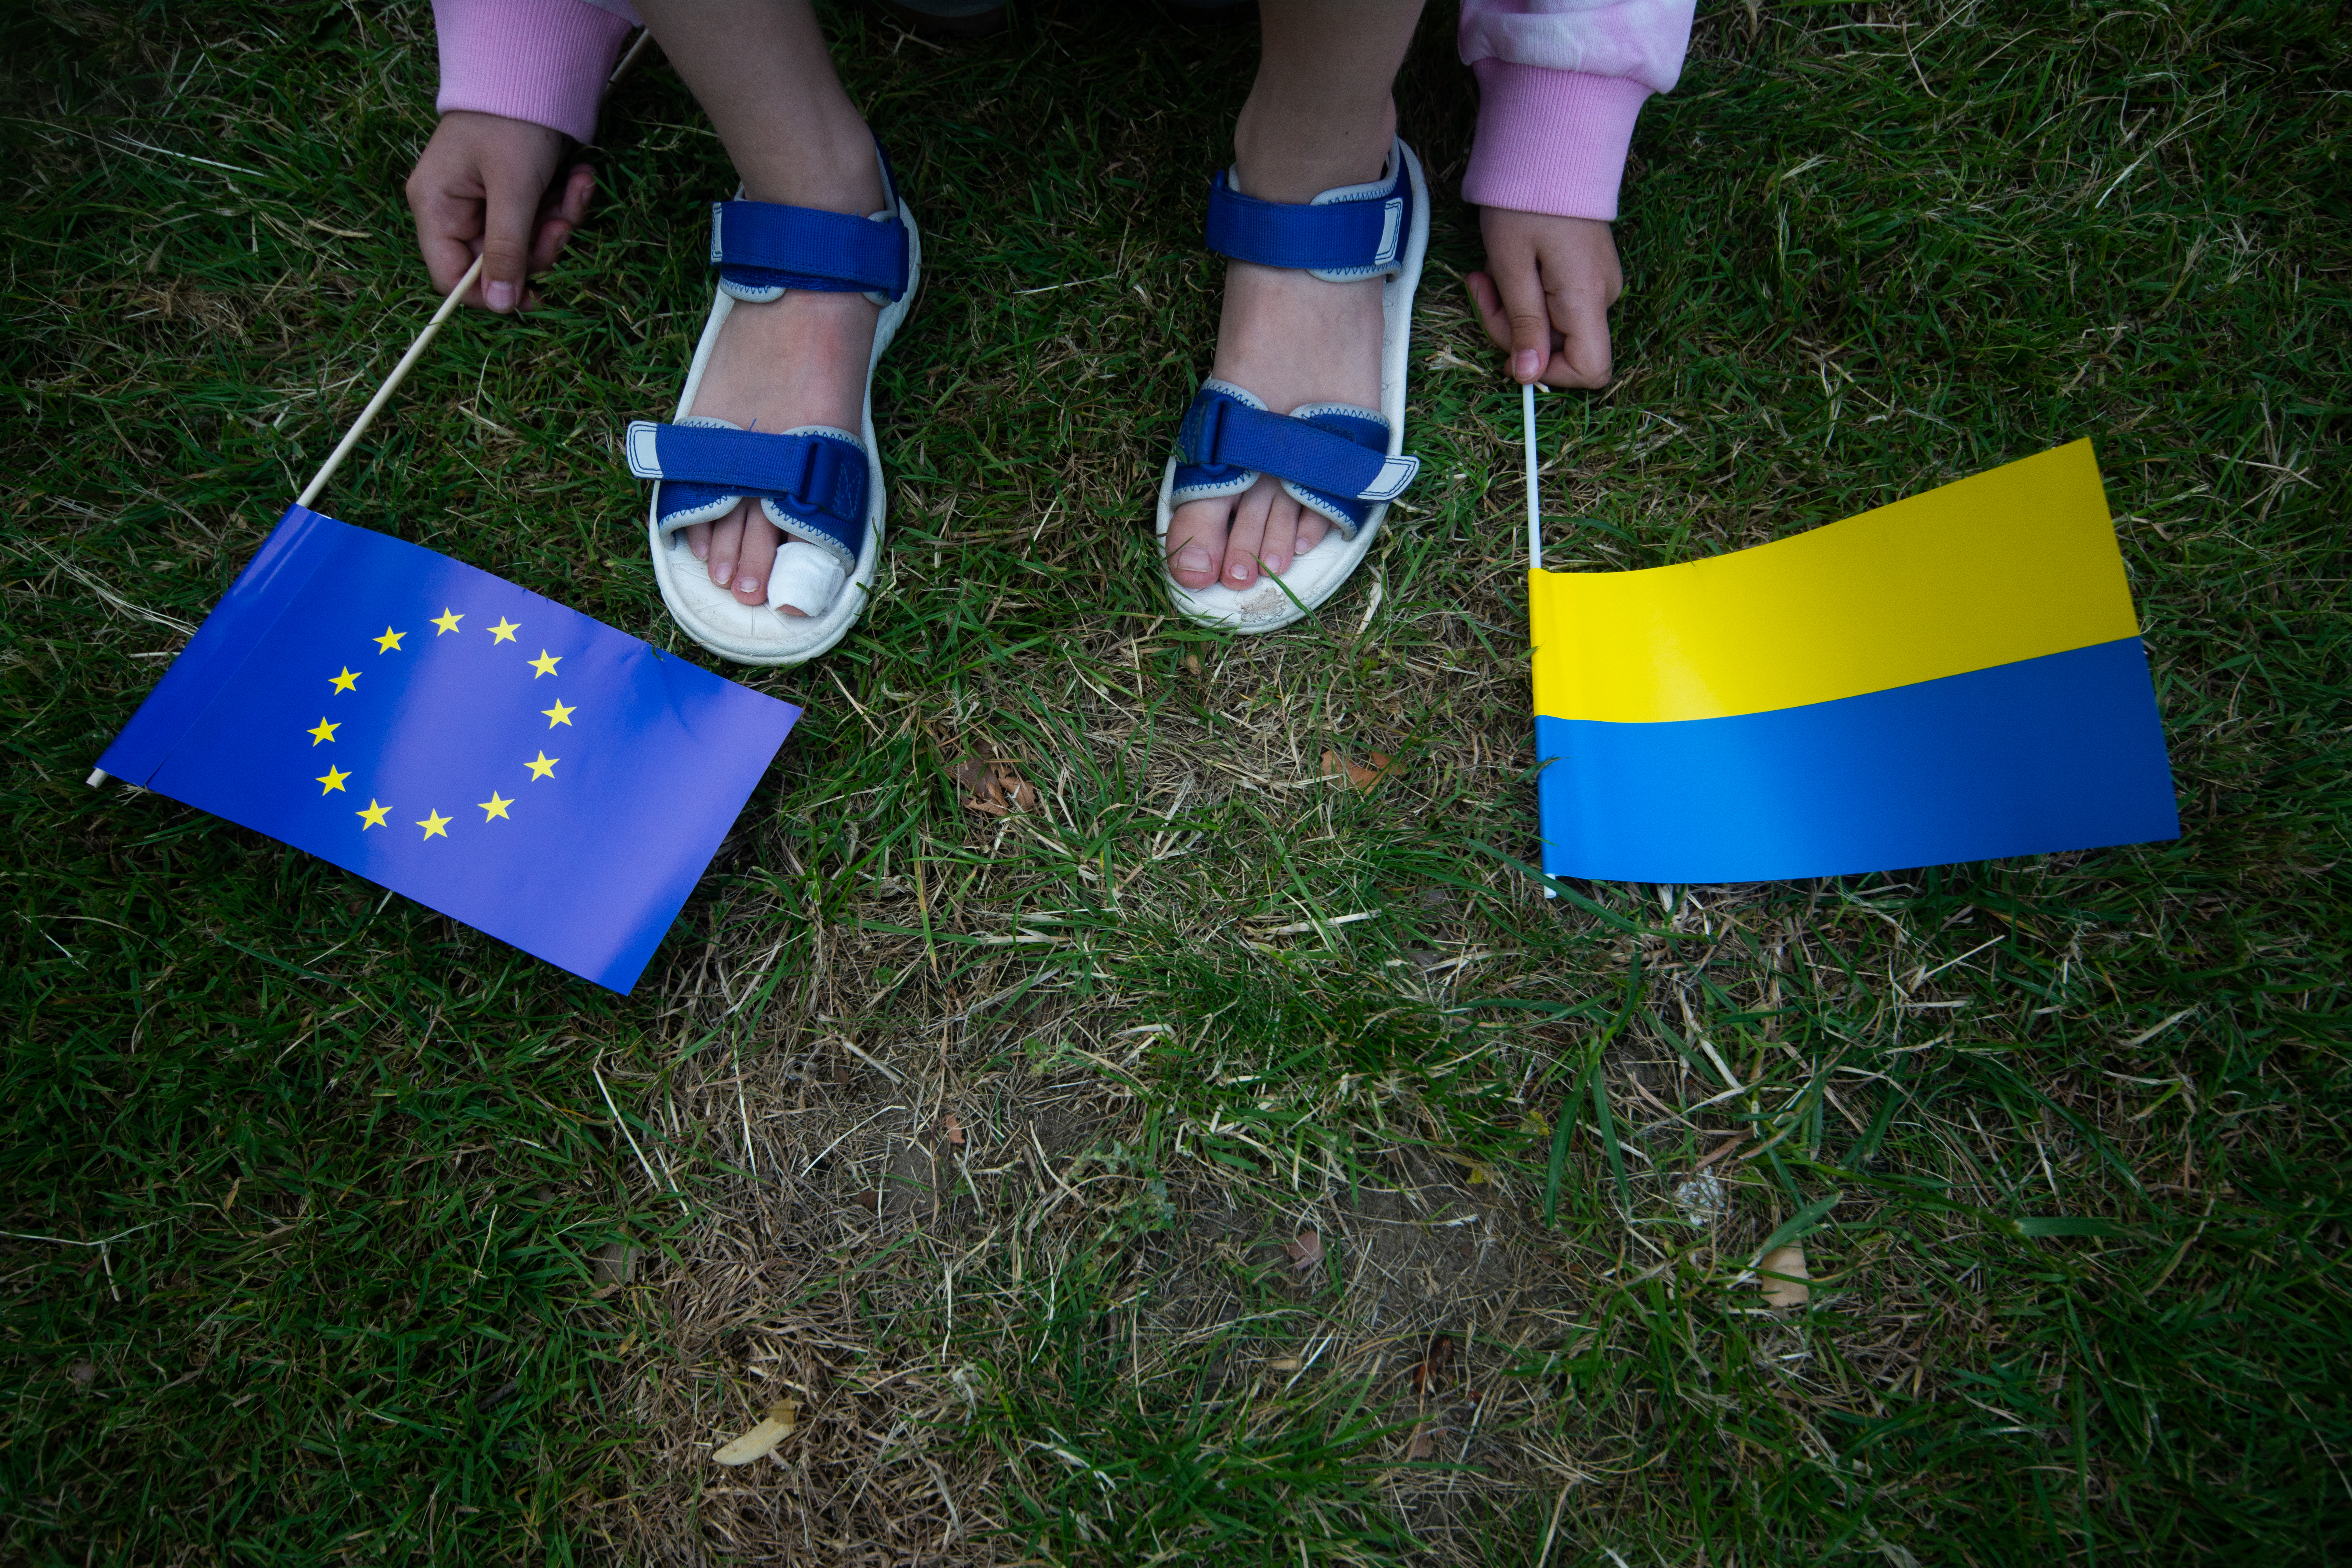 Ukraine on track for EU candidacy at summit, members say